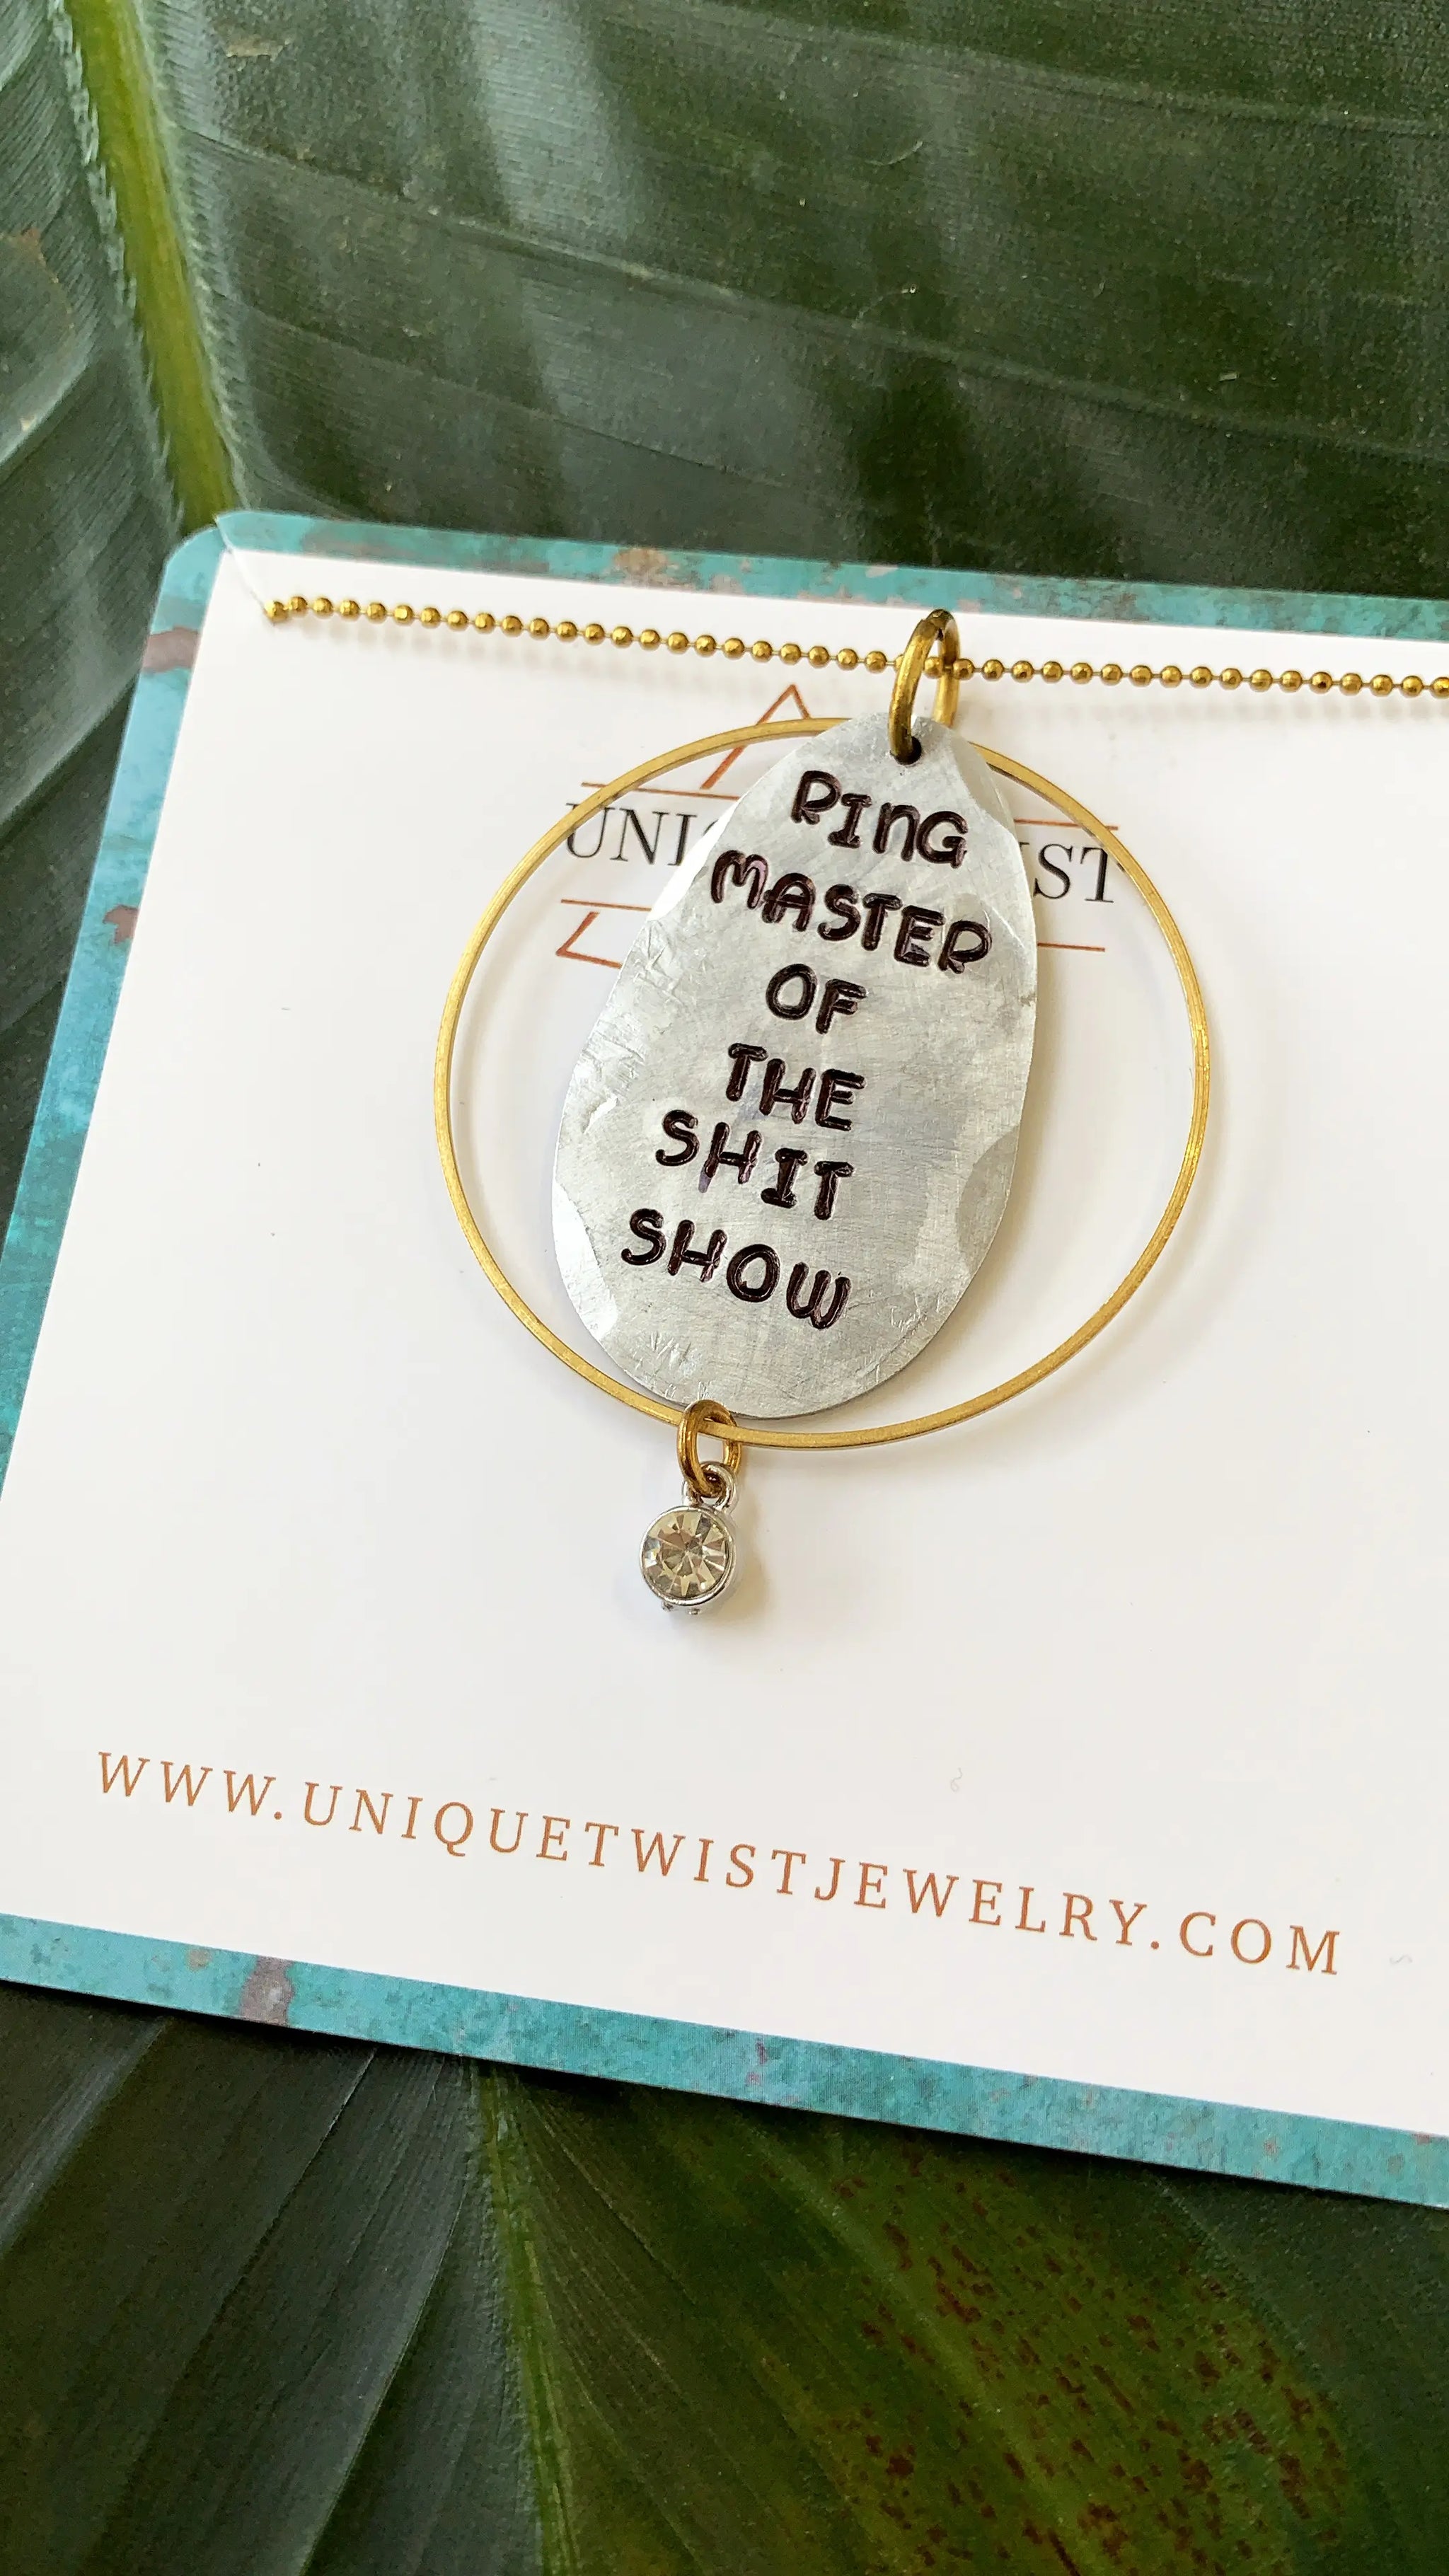 Ringmaster Of The Sh!tshow Necklace